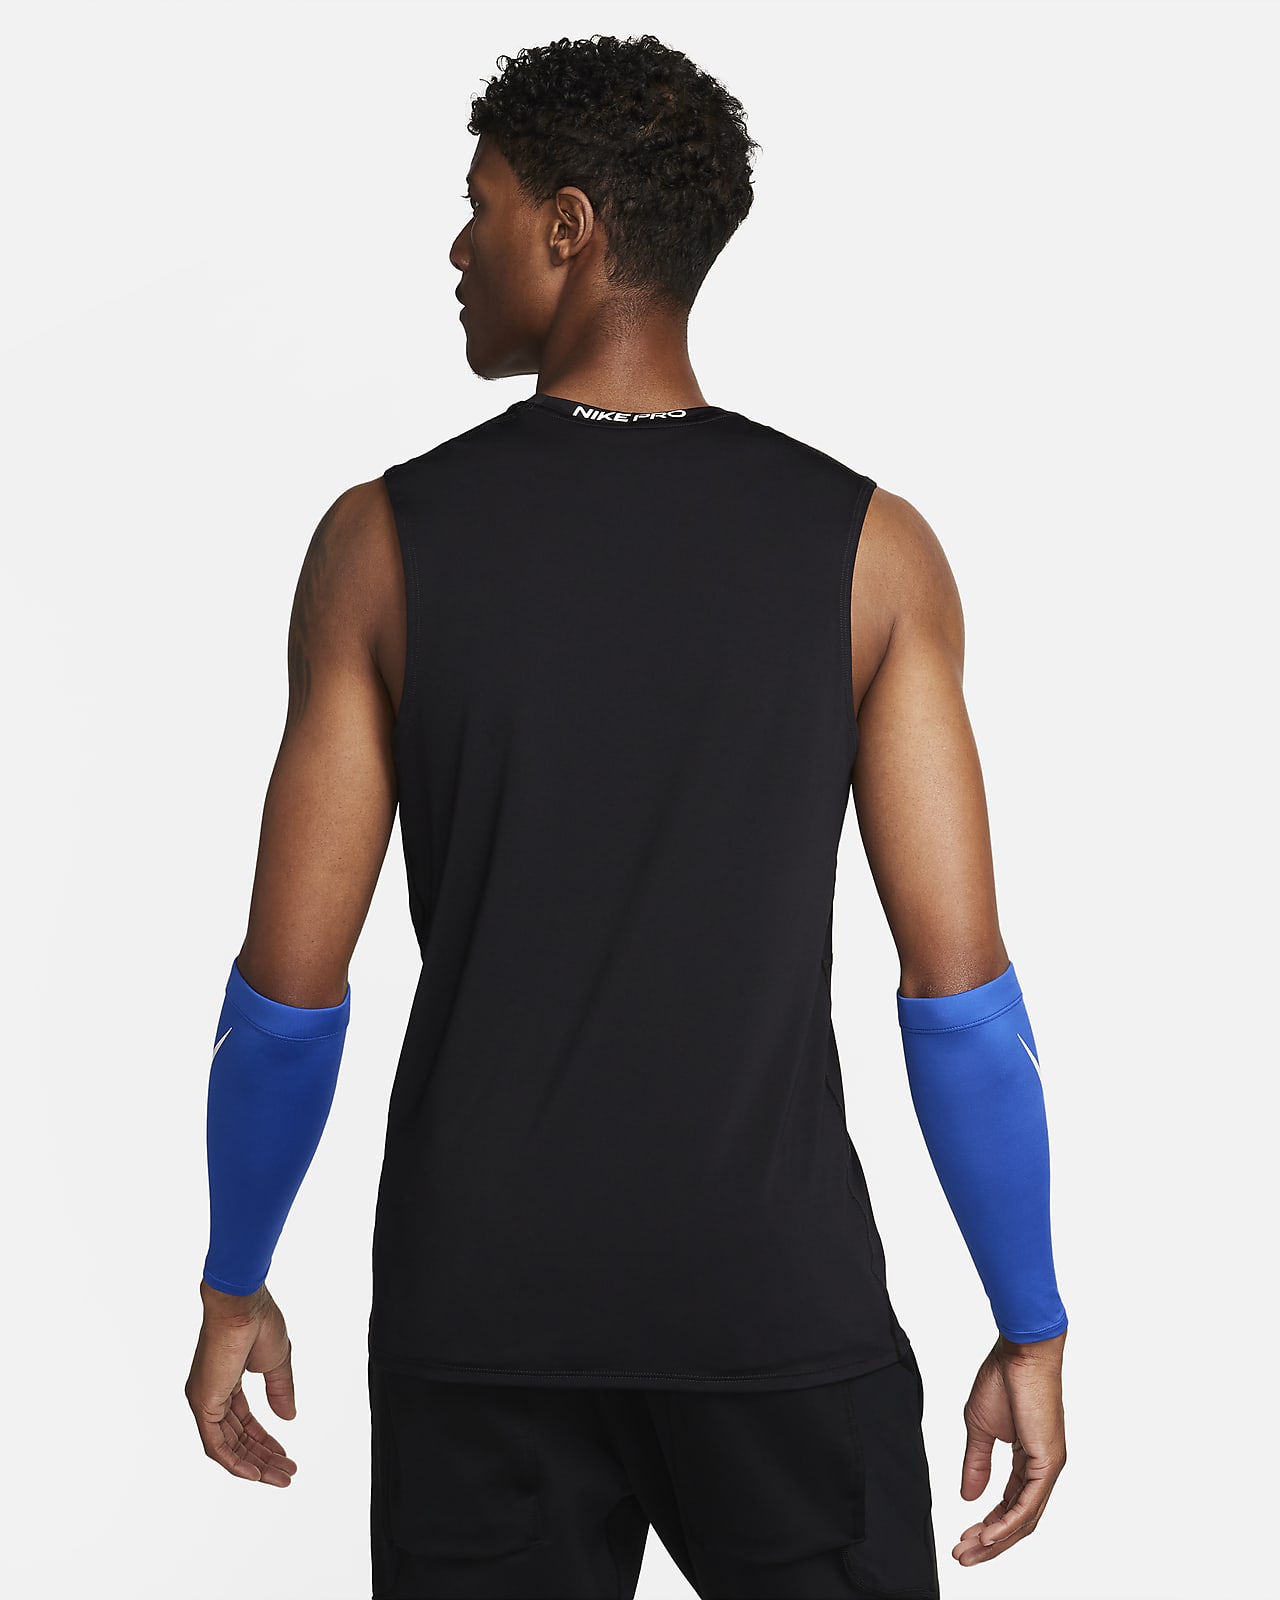 DRI-FIT ARM SLEEVES 4.0 - Sports Contact